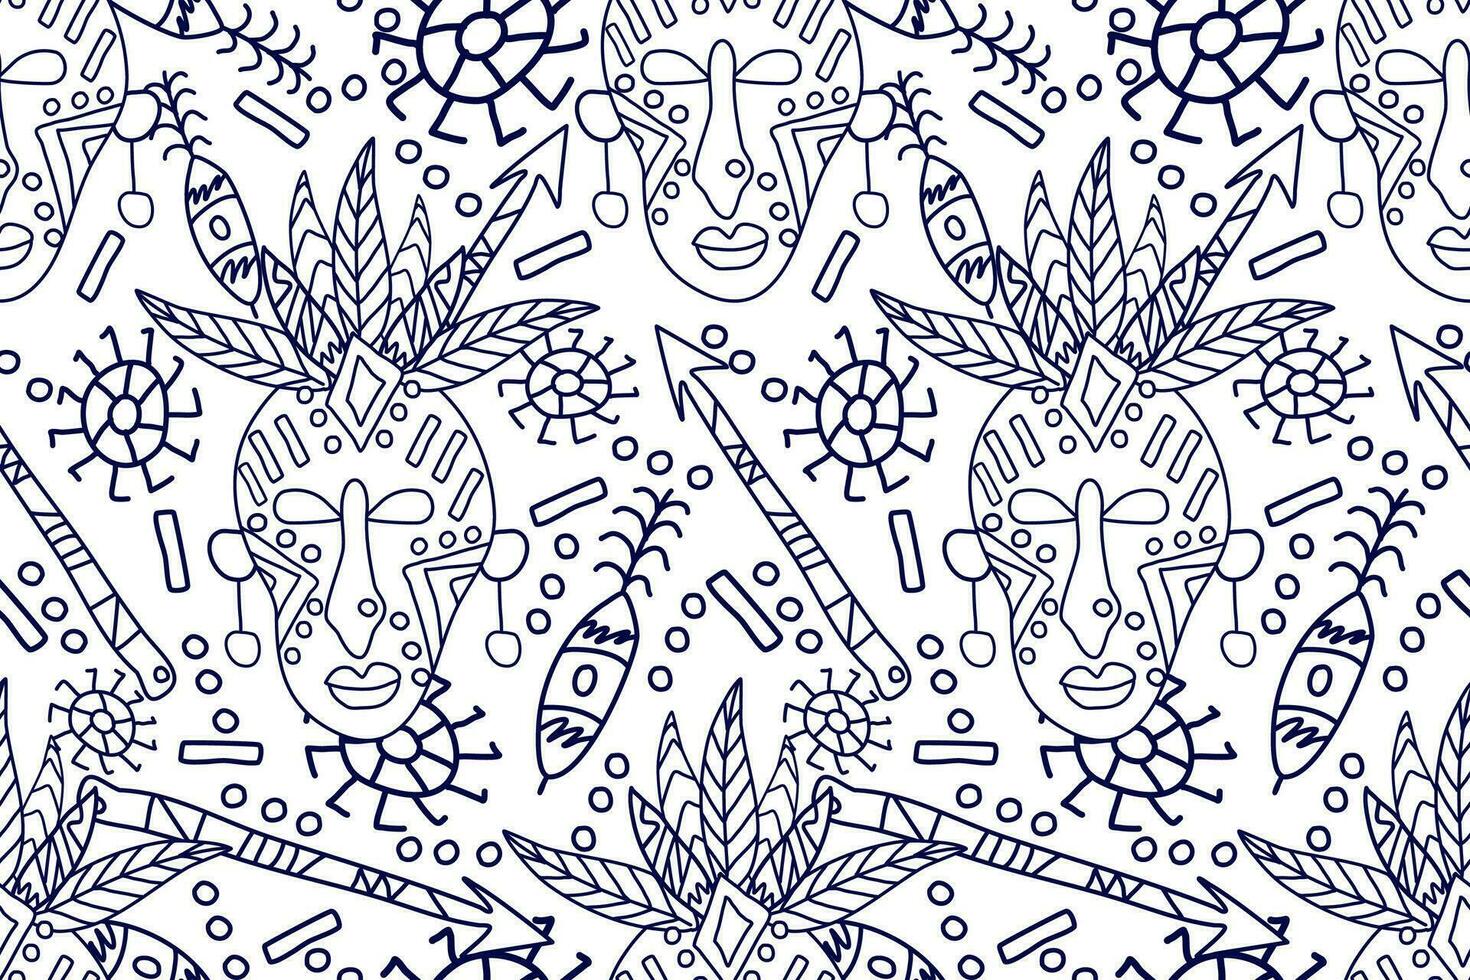 African seamless pattern.blue and white background.Aztec style abstract vector illustration.design for texture,fabric,clothing,wrapping,decoration.African doodle Art Pattern.